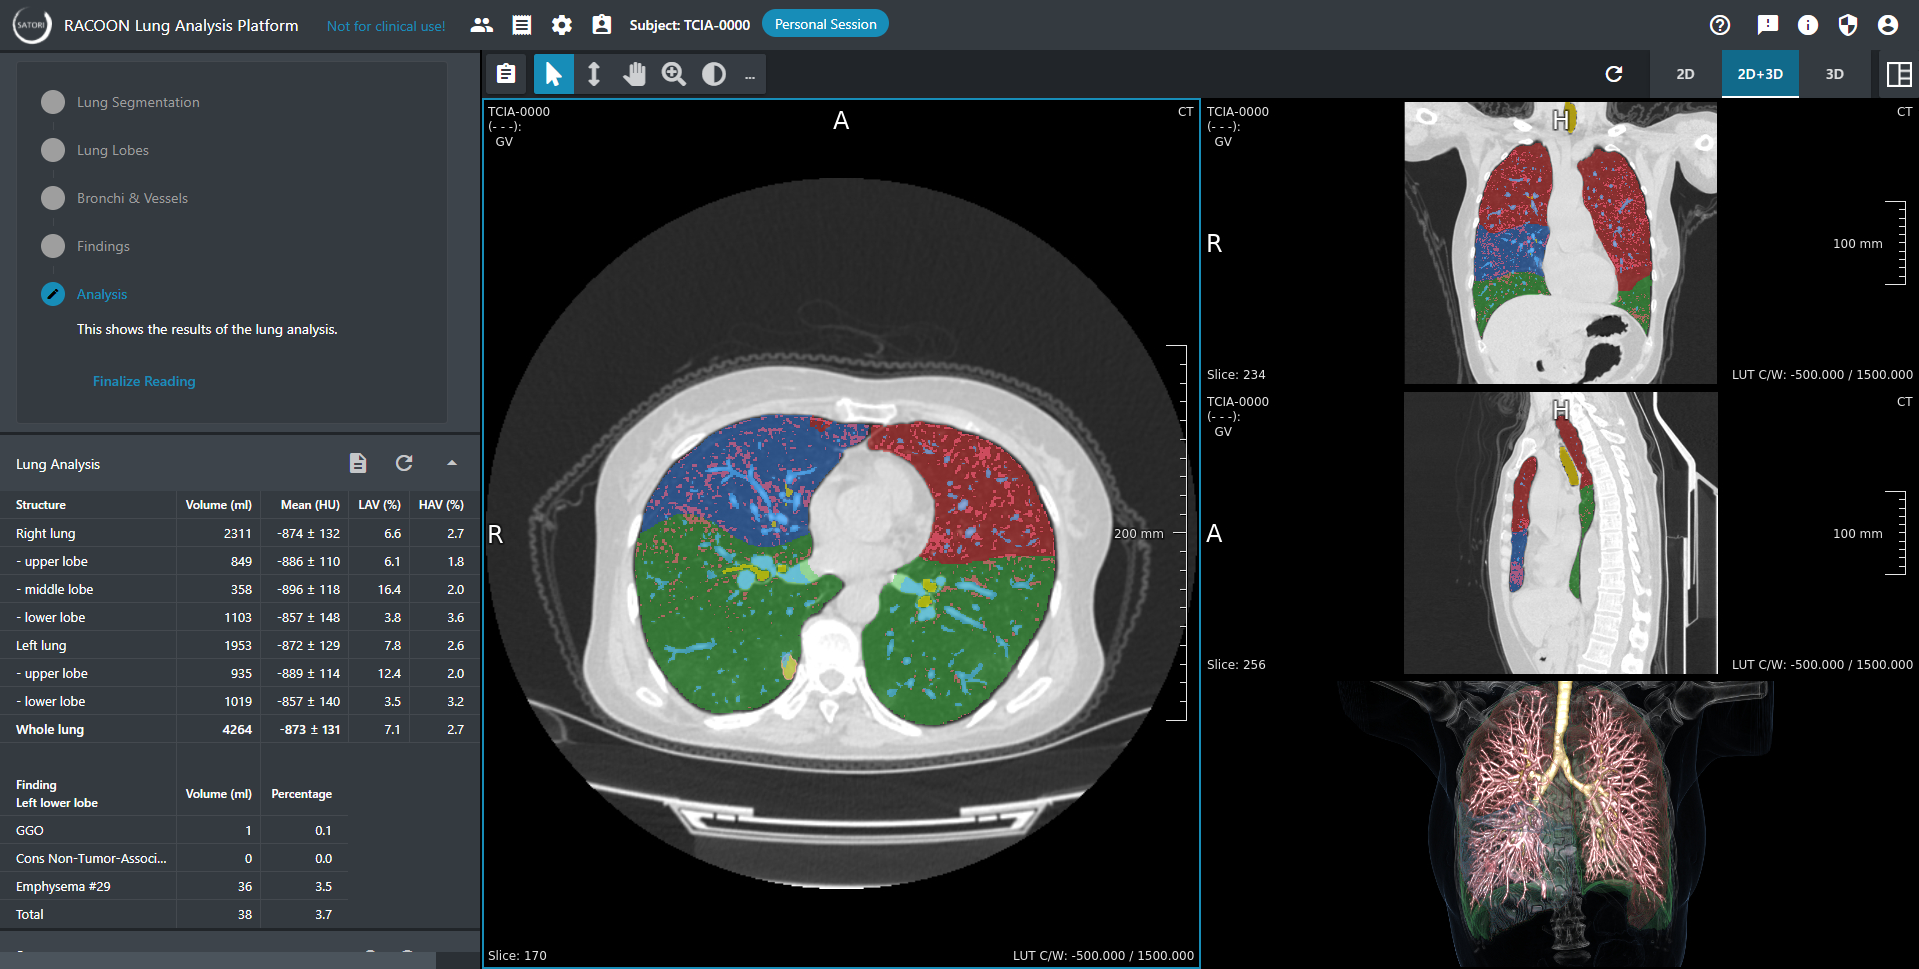 A SATORI configured for lung images shows a CT with analysis results and a 3D rendering of the lung